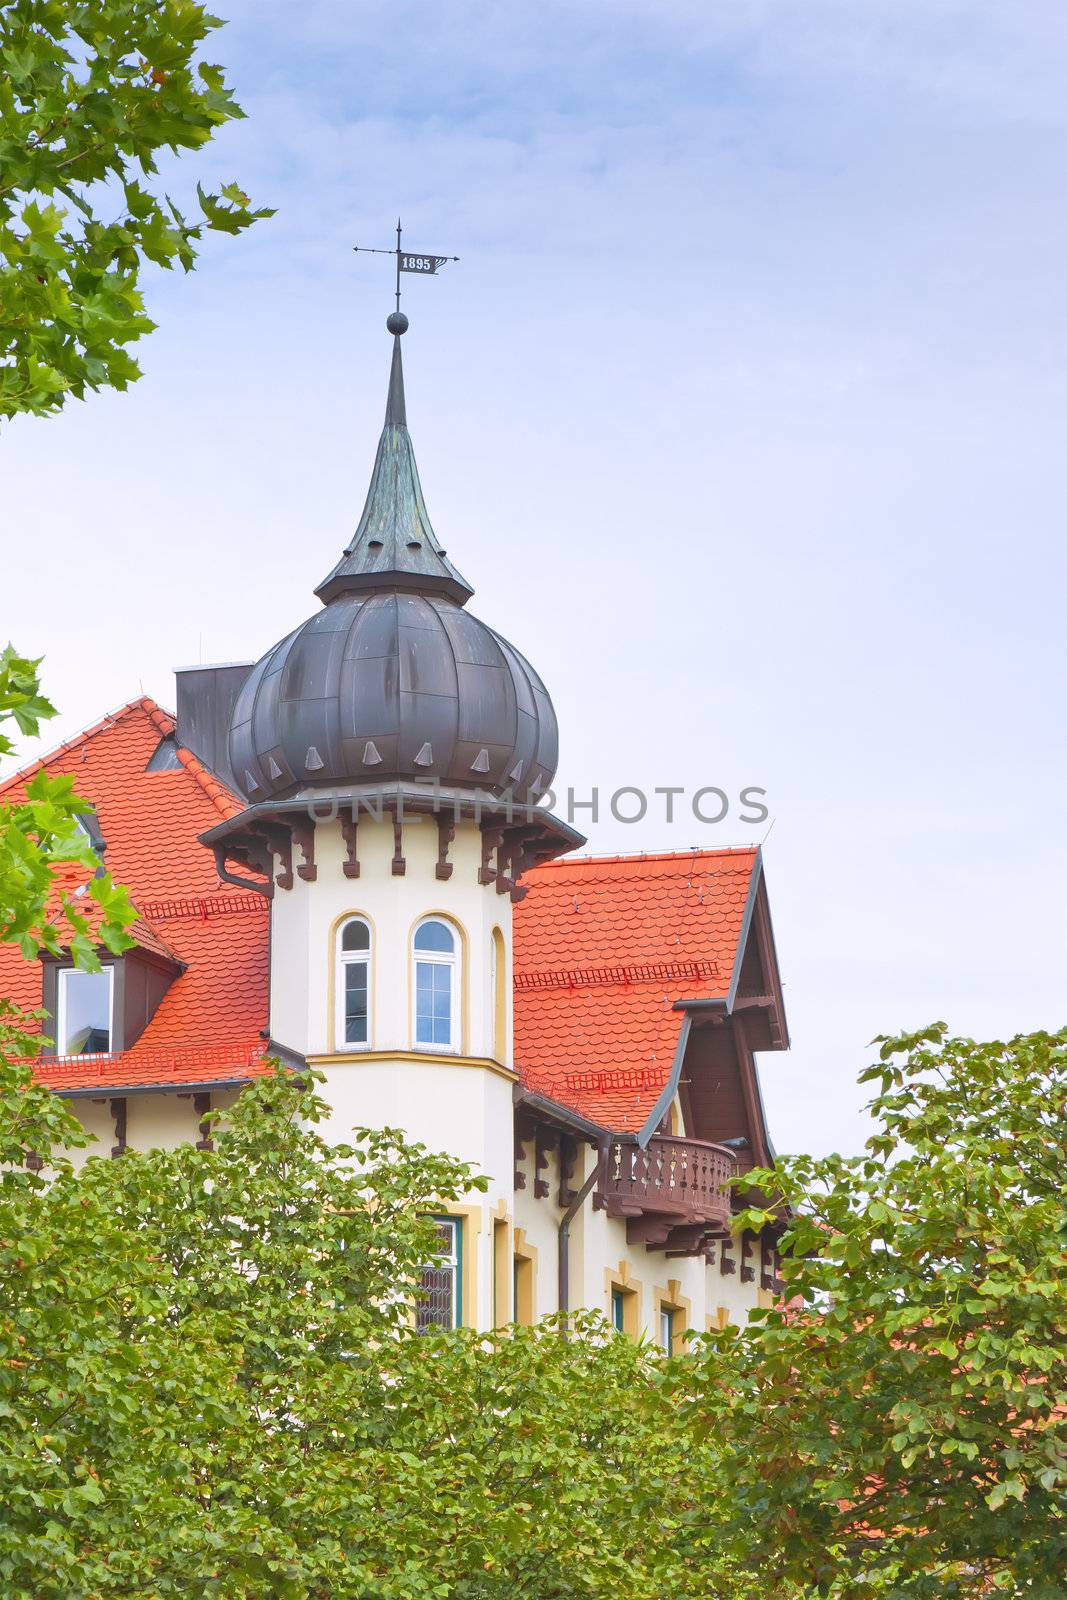 A nice image of a house with tower in bavaria